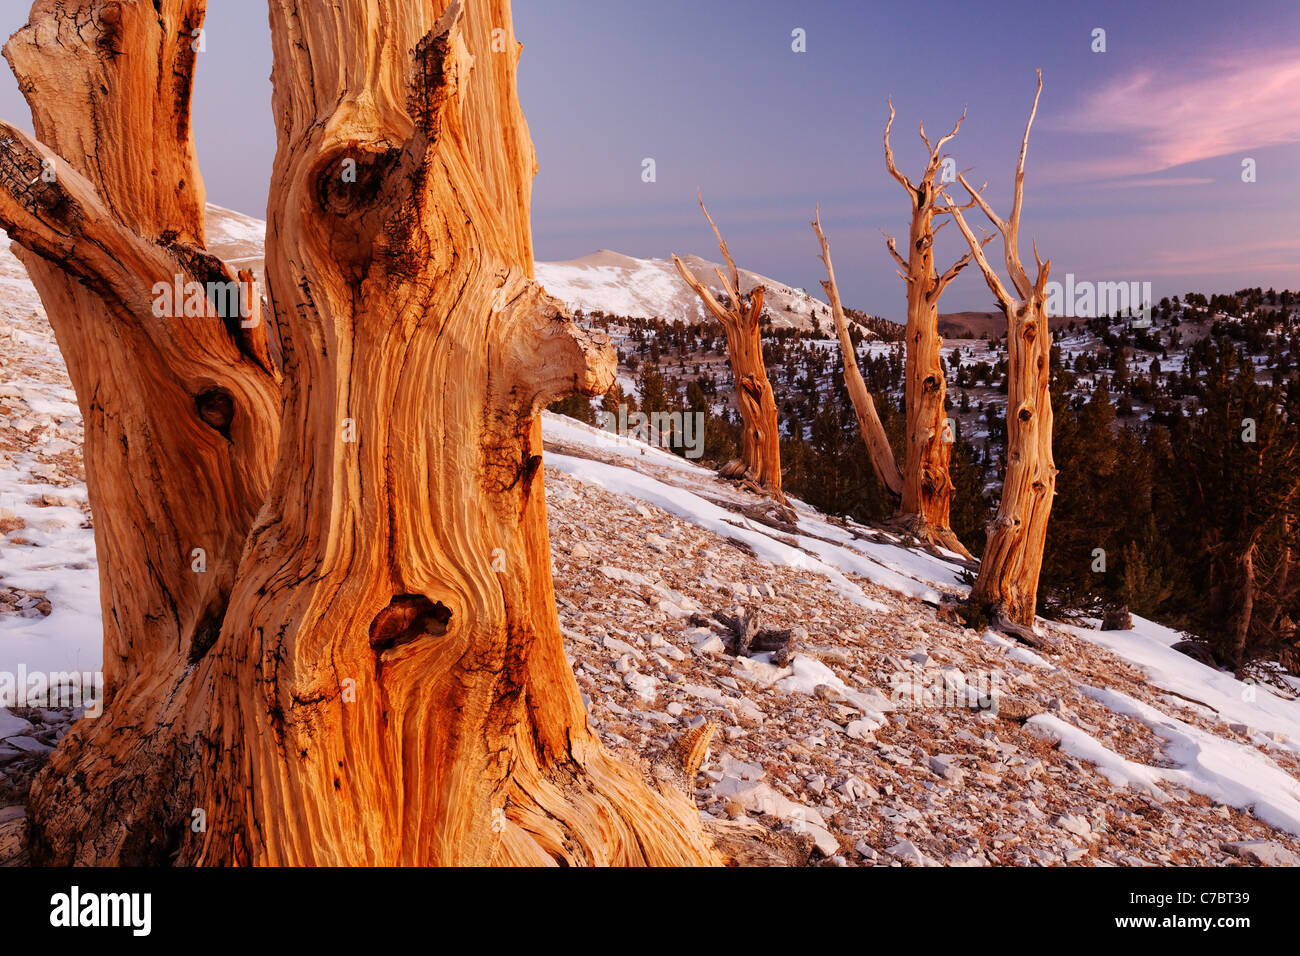 Bristlecone pines and White Mountains just prior to sunrise, Inyo National Forest, White Mountains, California, USA Stock Photo